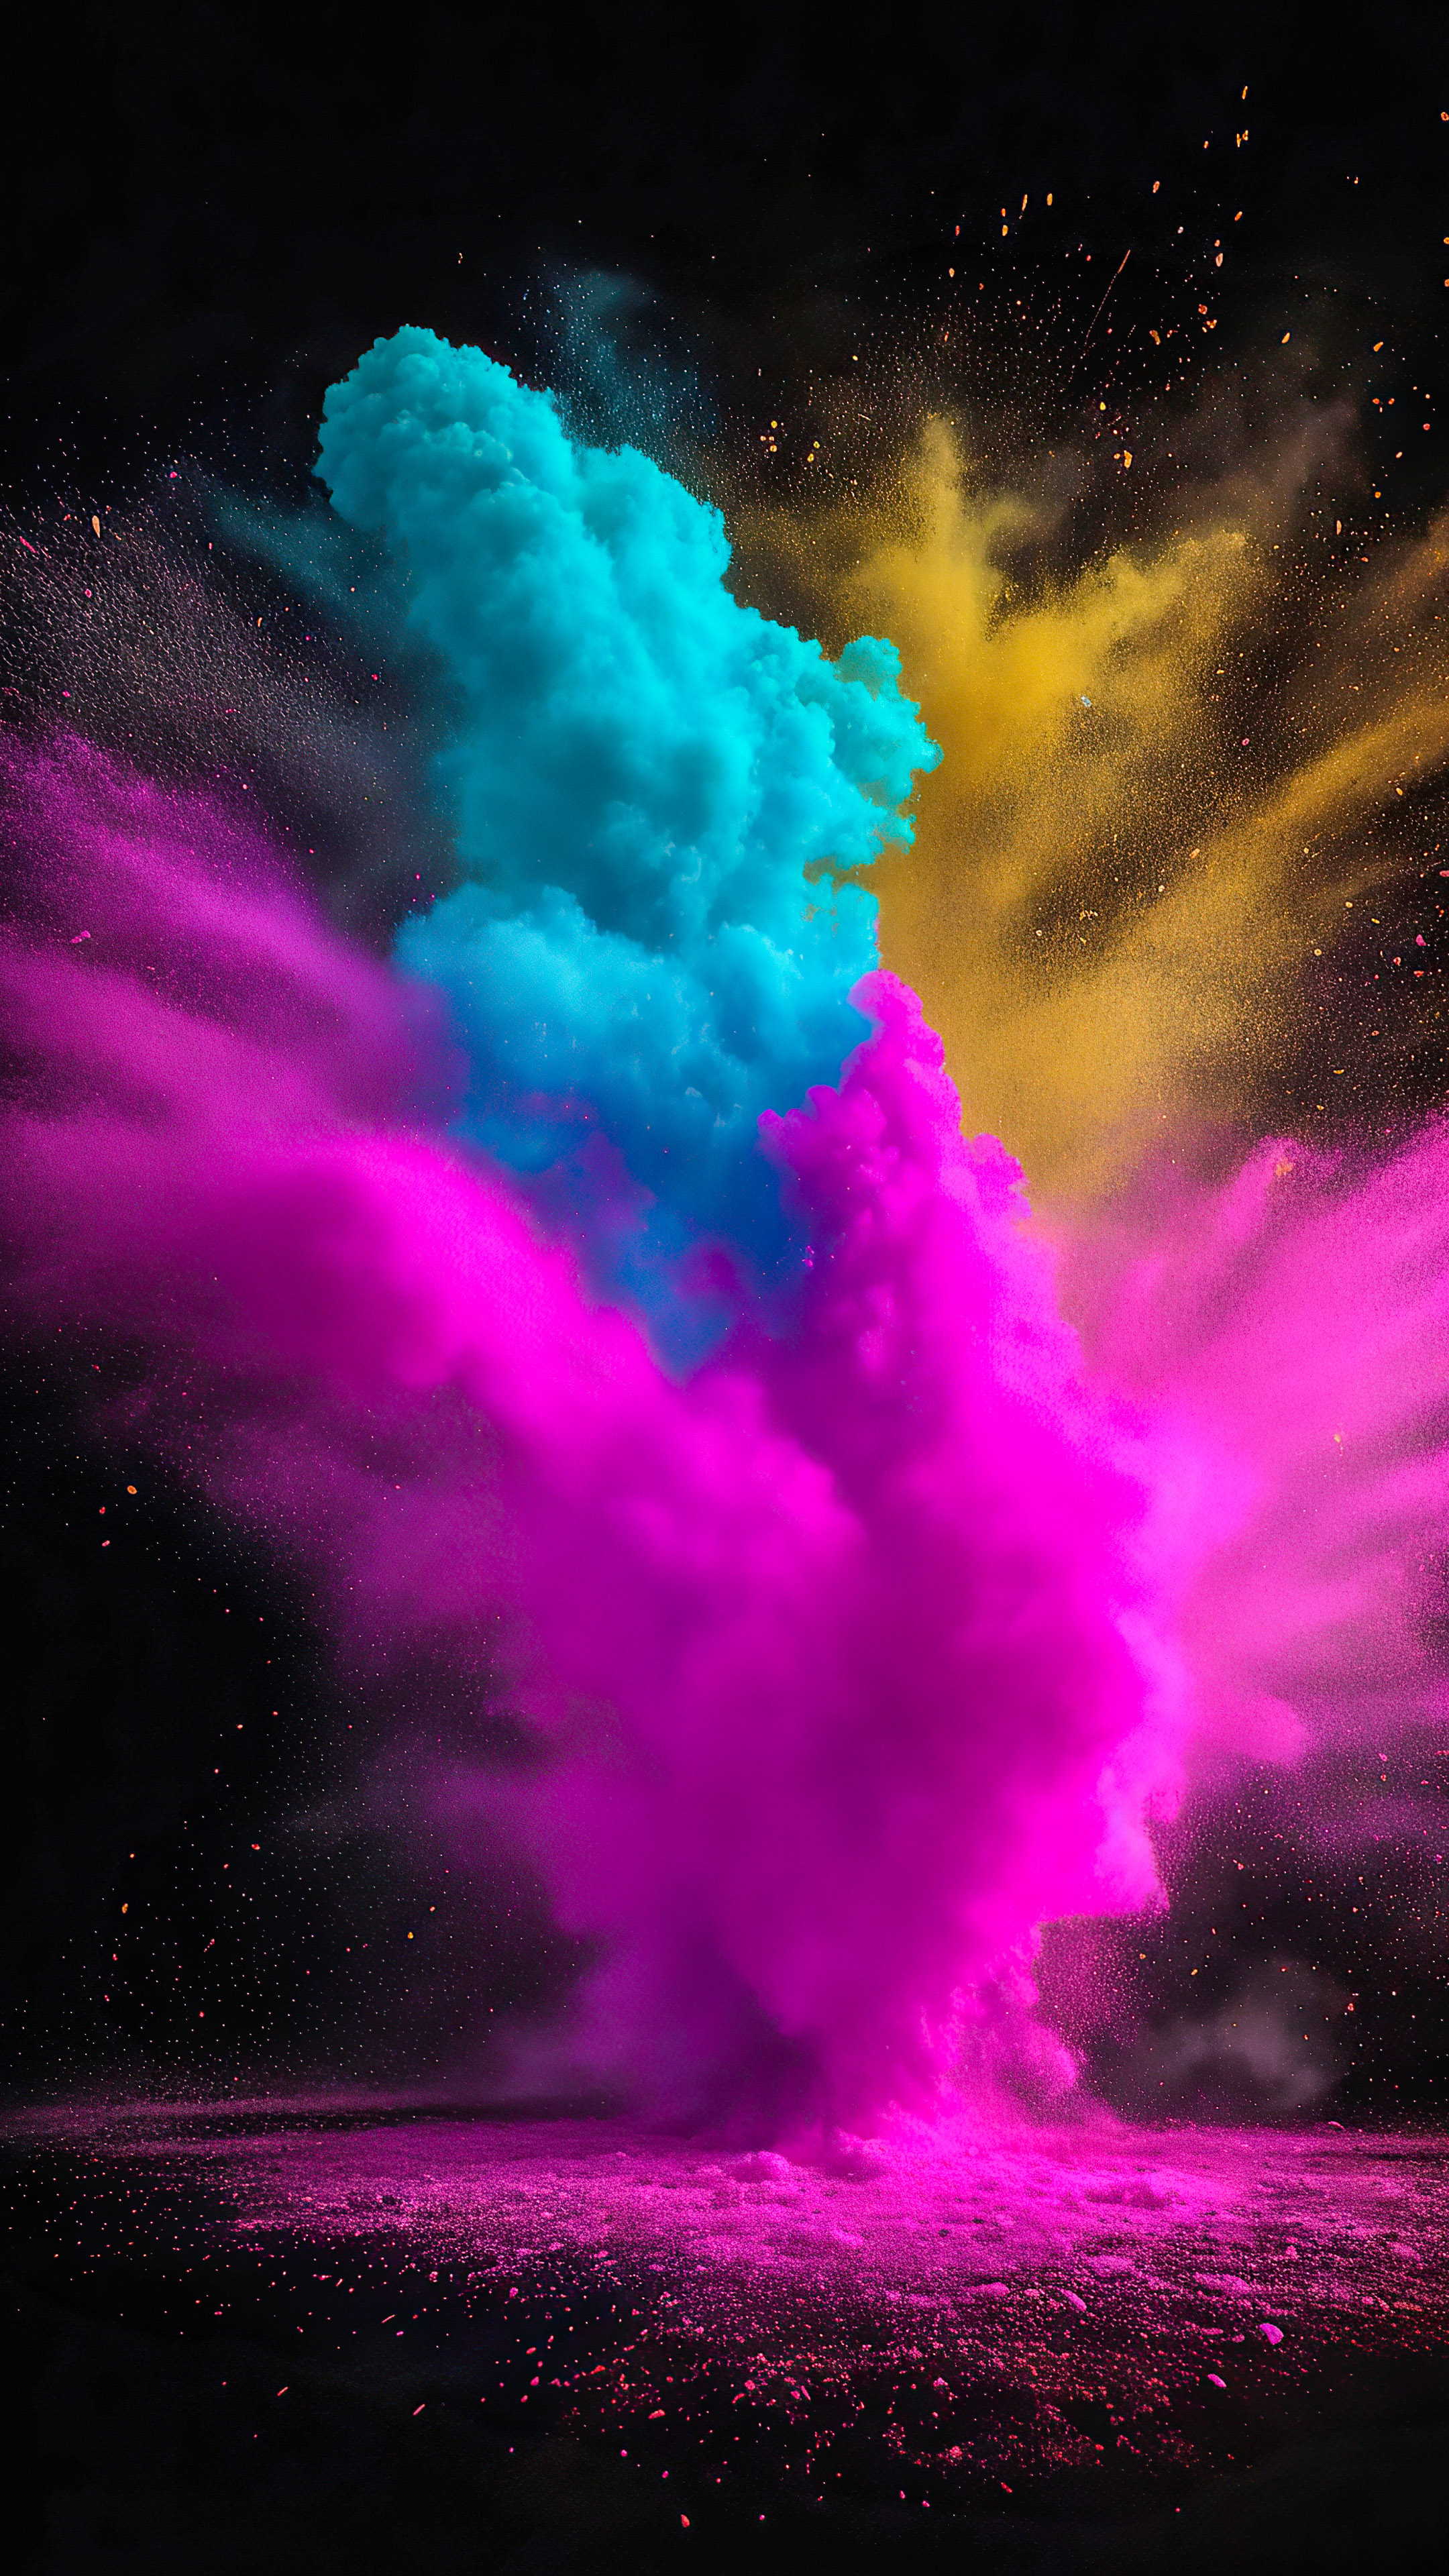 Experience a dark abstract wallpaper for phone, capturing the essence of dust powder particles in a splash explosion against a black background, creating a dramatic and captivating visual effect.